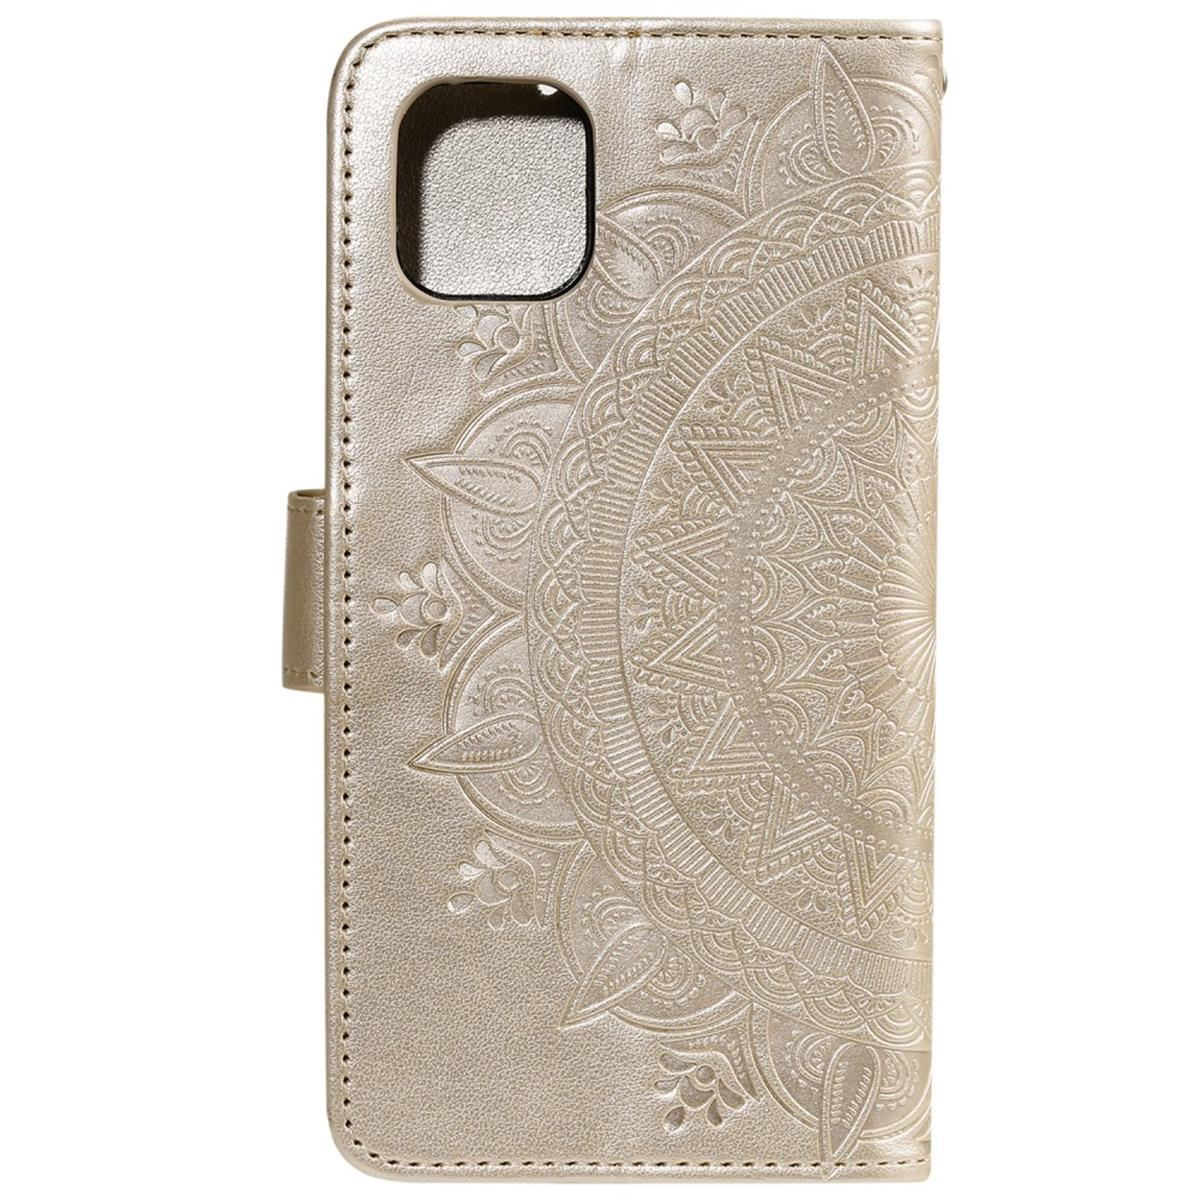 mit Bookcover, Gold Apple, Muster, COVERKINGZ iPhone 11, Mandala Klapphülle